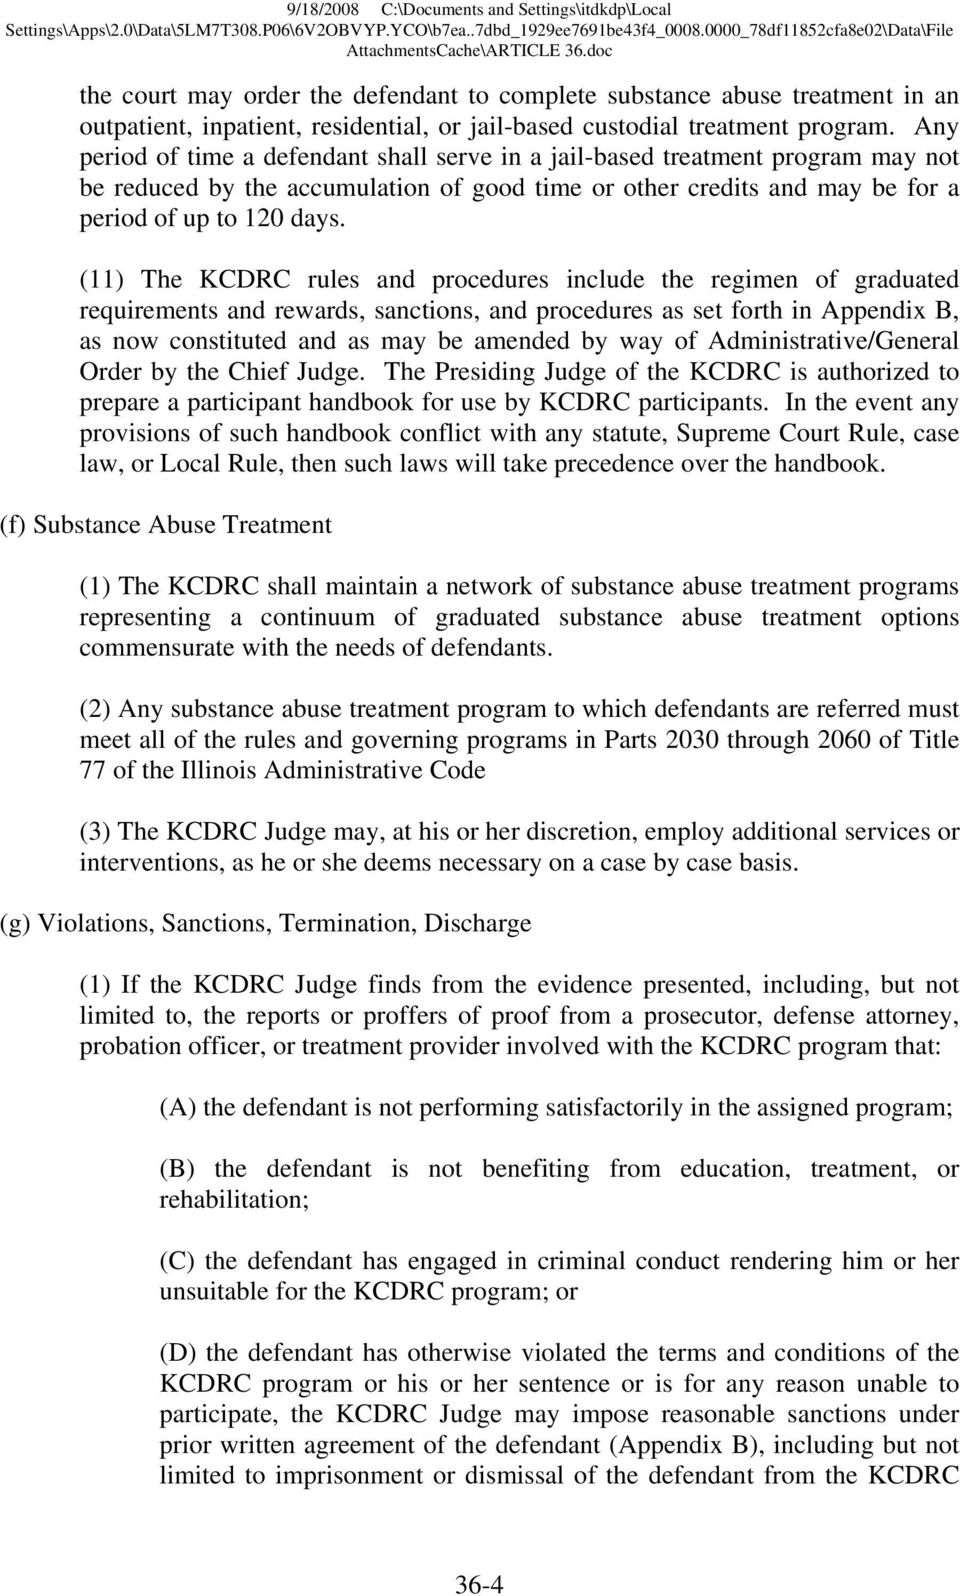 (11) The KCDRC rules and procedures include the regimen of graduated requirements and rewards, sanctions, and procedures as set forth in Appendix B, as now constituted and as may be amended by way of